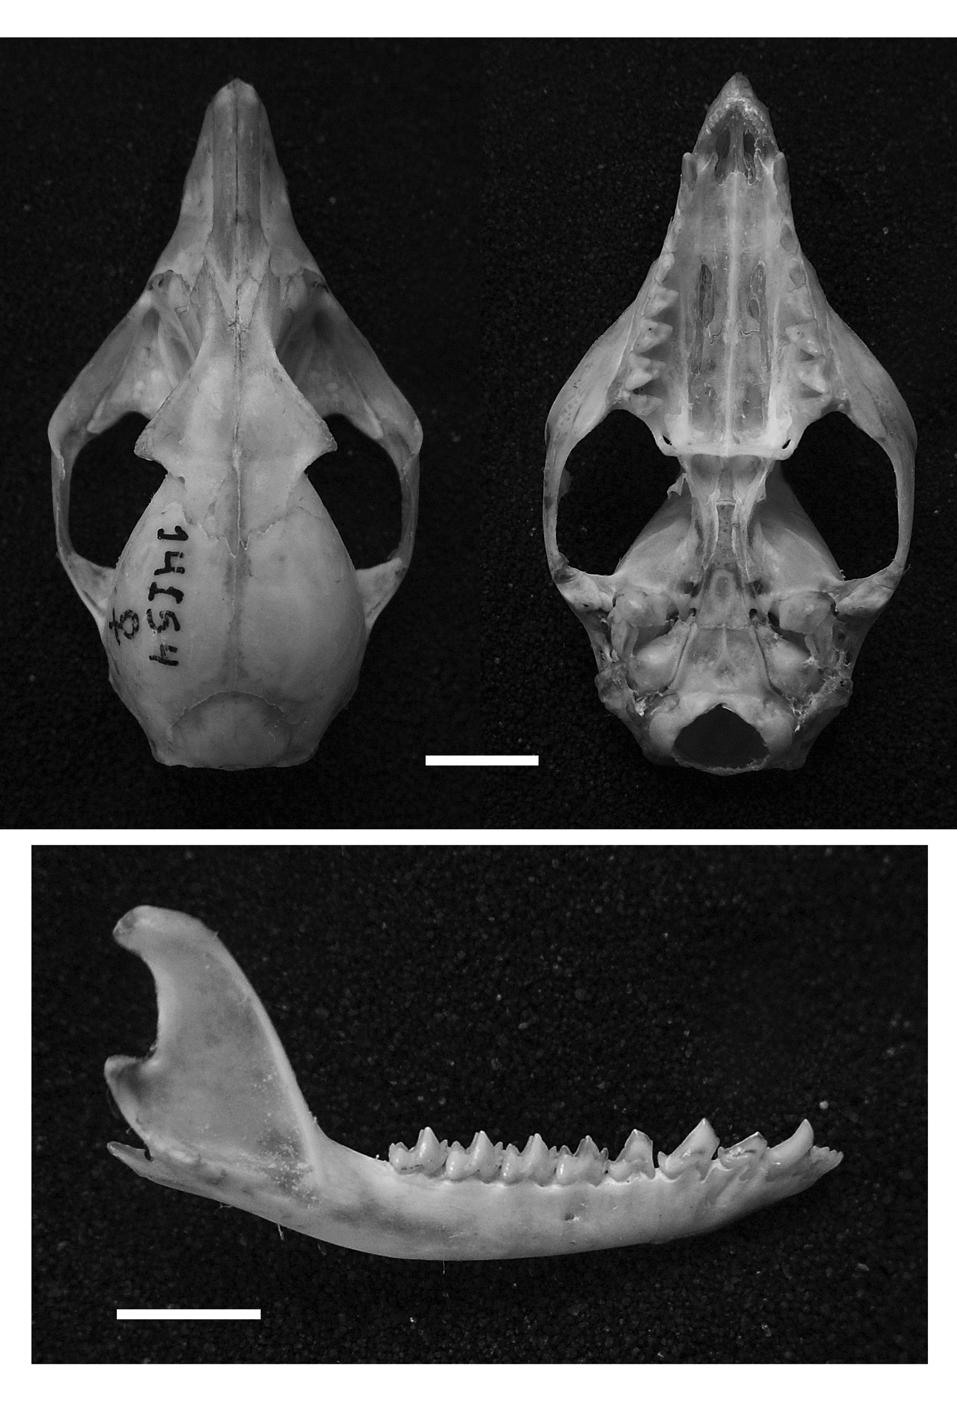 FIGURE 2. Dorsal (above, left) and ventral (above, right) view of the skull and lower jaw (below) of MUSM 14154, a female specimen of M. andersoni reported in the text.